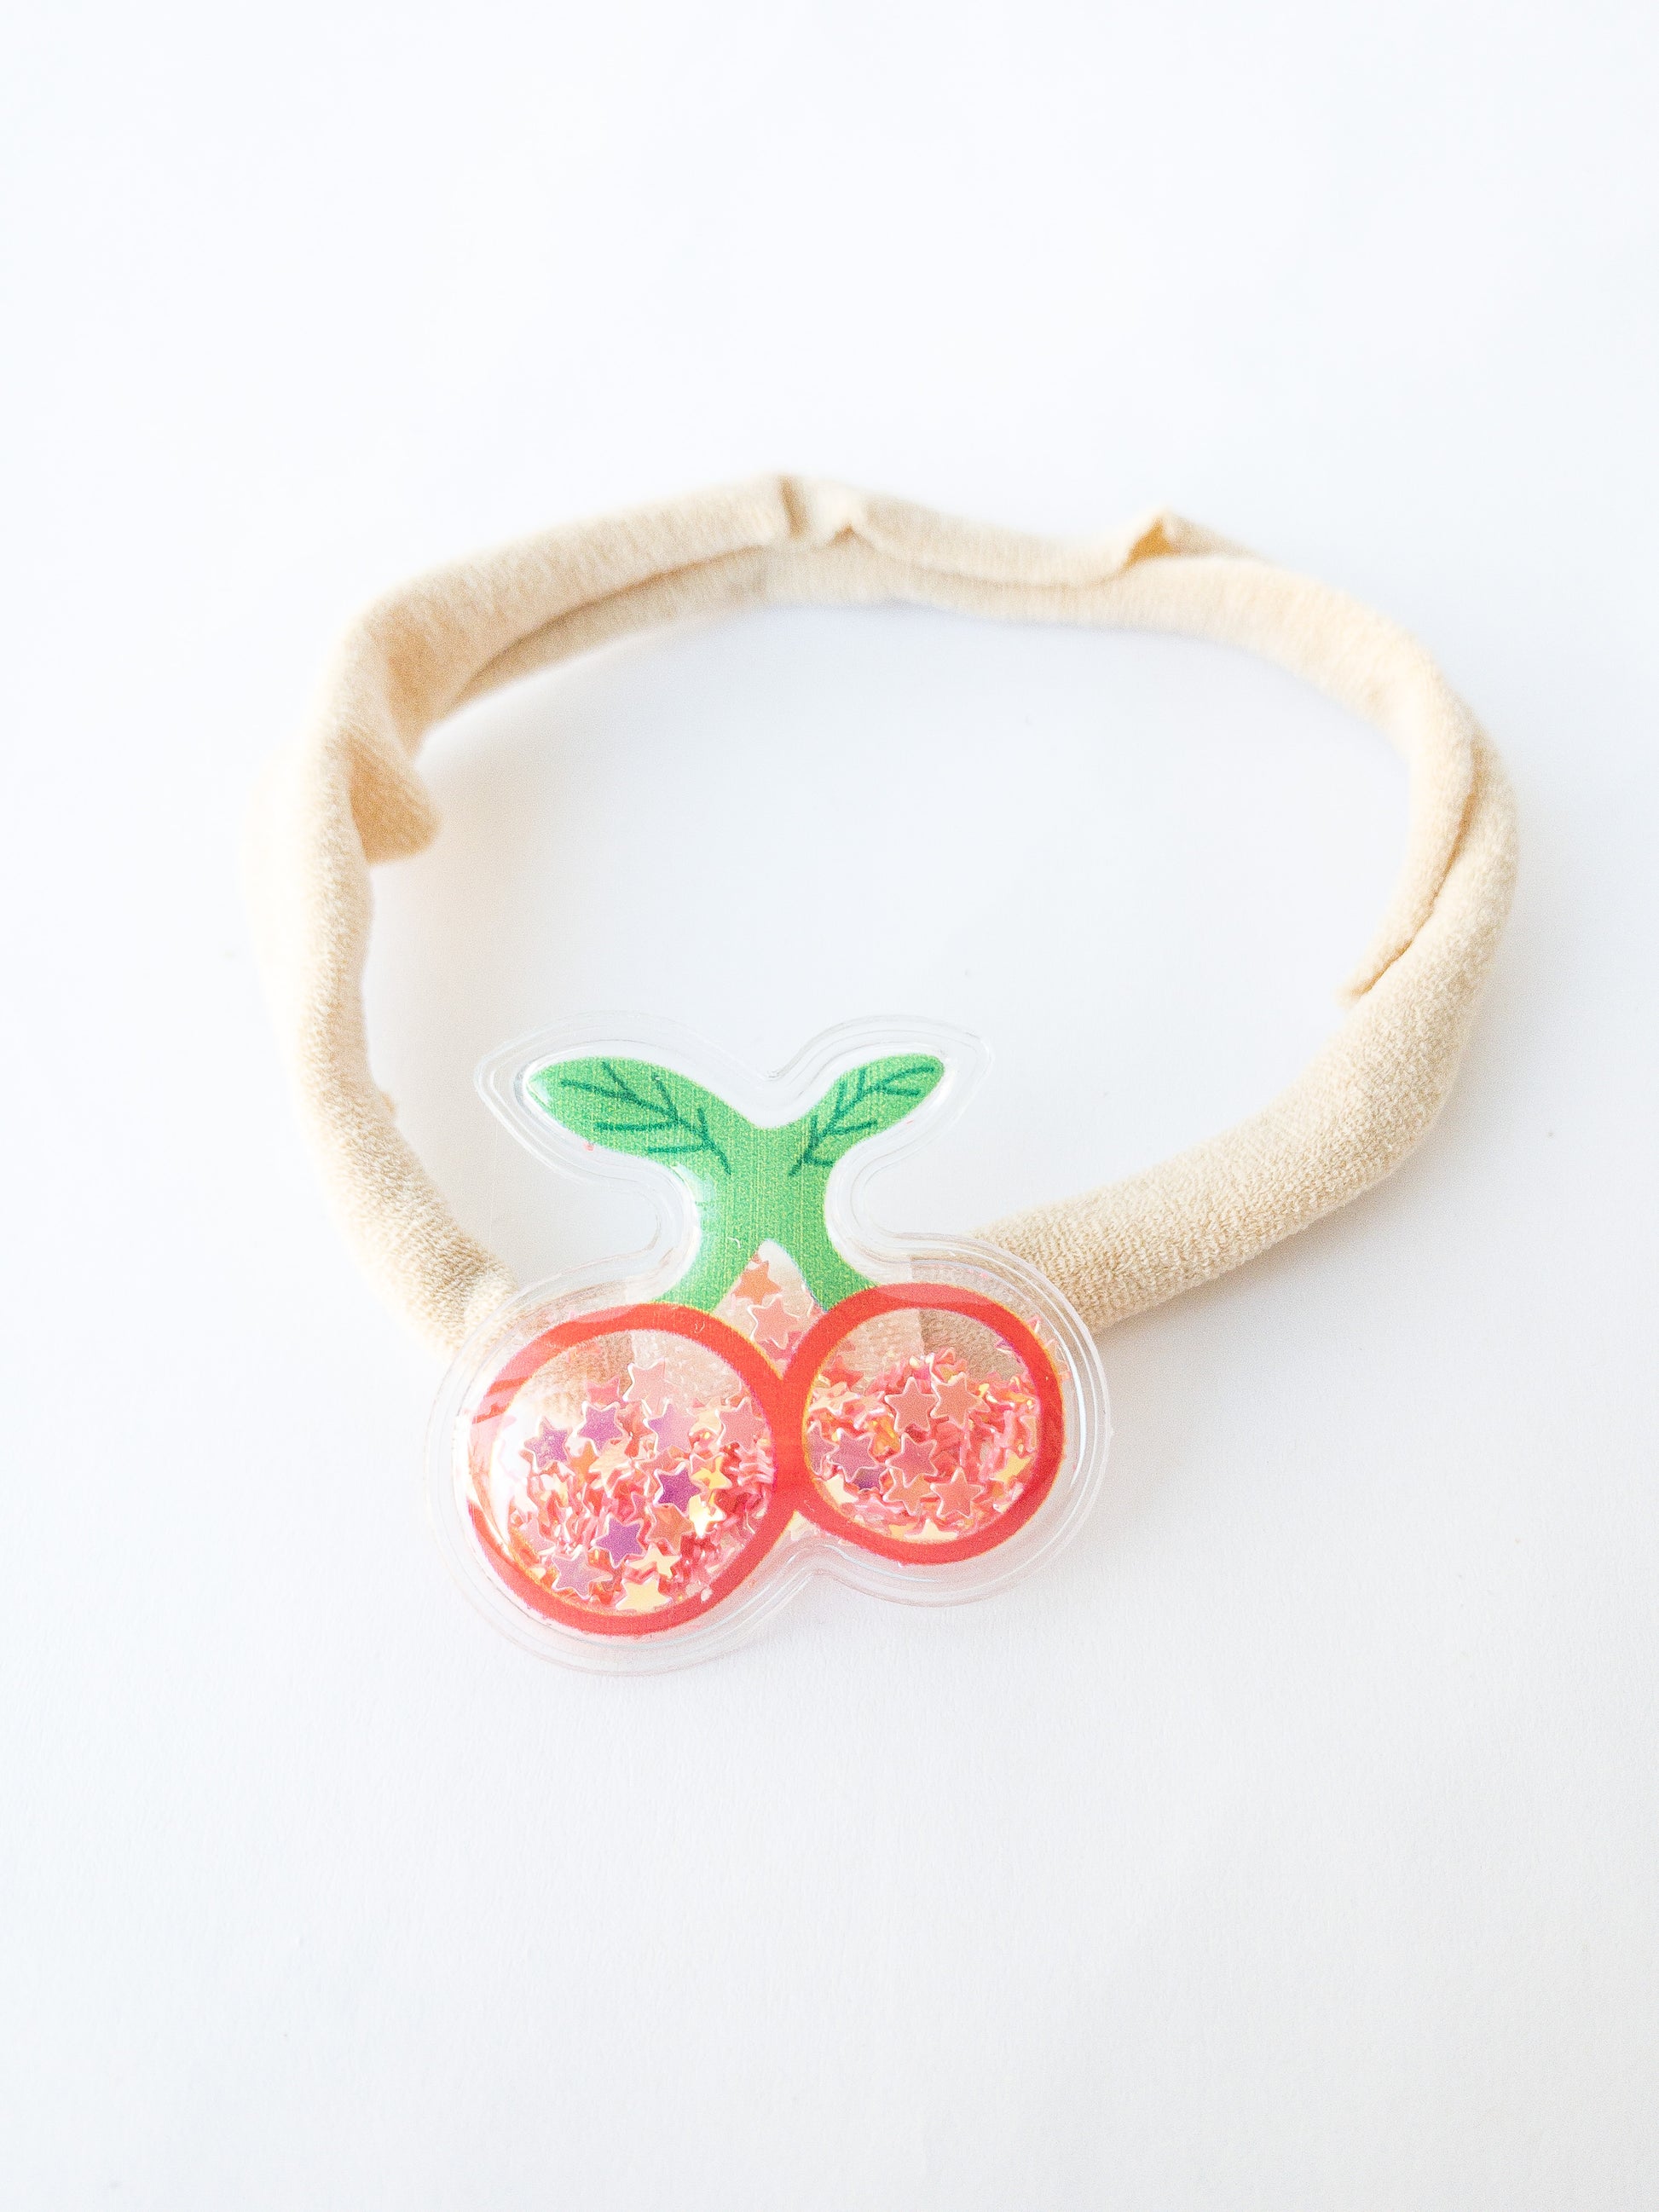 Our most popular shaker fruits now as baby bands! Six different cute fruits to choose from: strawberry, grapes, banana, carrot, cherry, and pineapple. Each shaker fruit is filled with tiny shimmery colorful star confetti. Make your own set, mix and match them!   Great for kids with little to no hair. The nylon elastic is super stretchy and super soft.